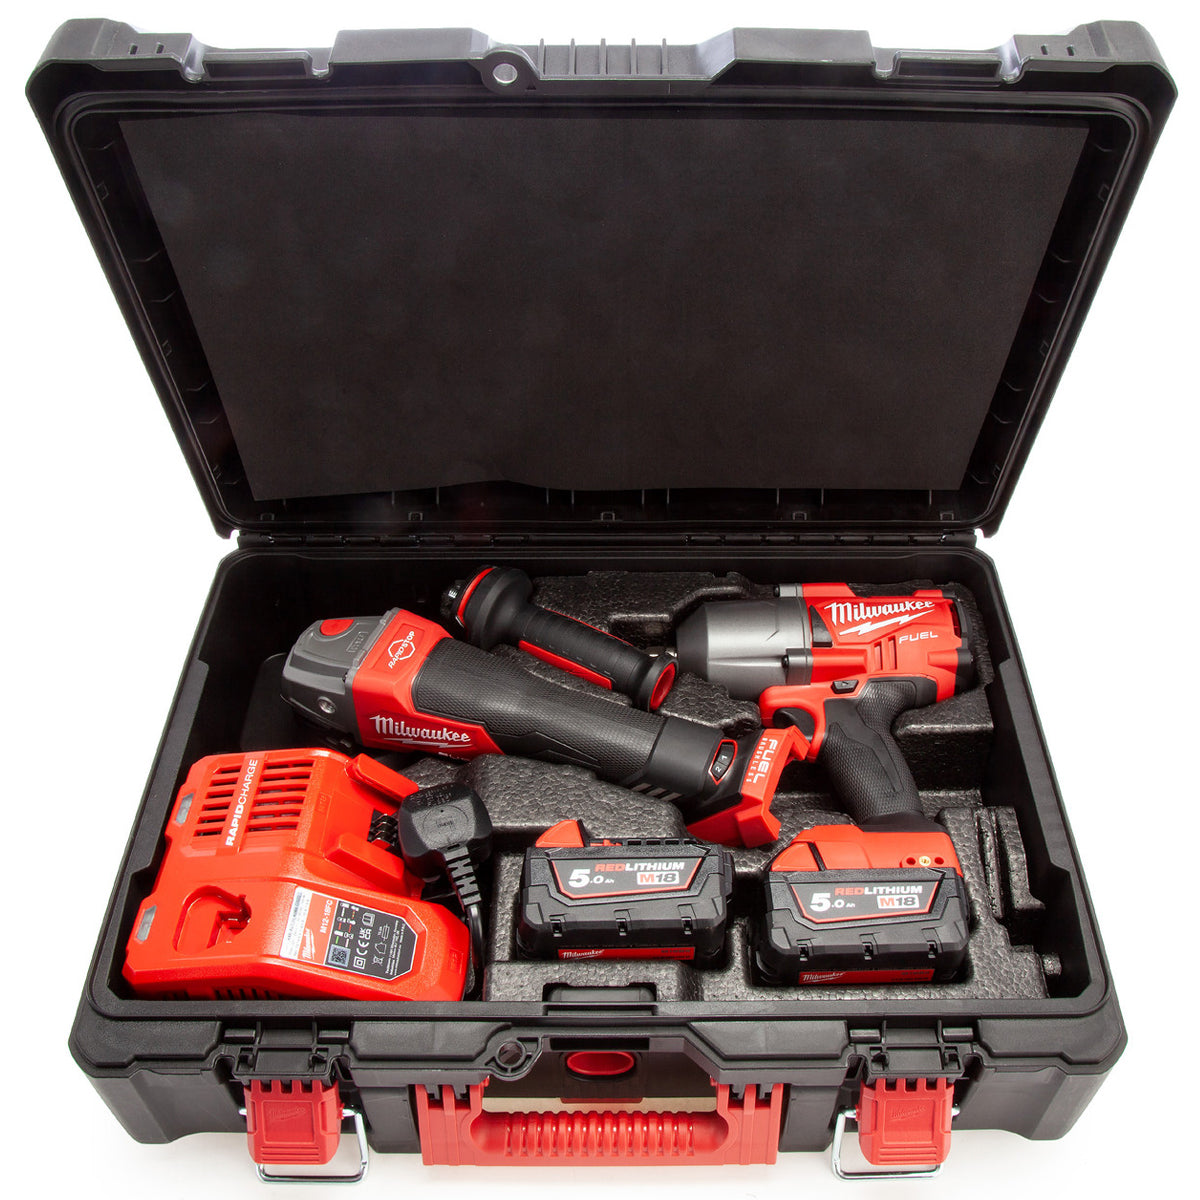 Milwaukee M18FPP2BD-502P 18V Fuel Impact Wrench & Angle Grinder with 2 x 5.0Ah Battery 4933492426